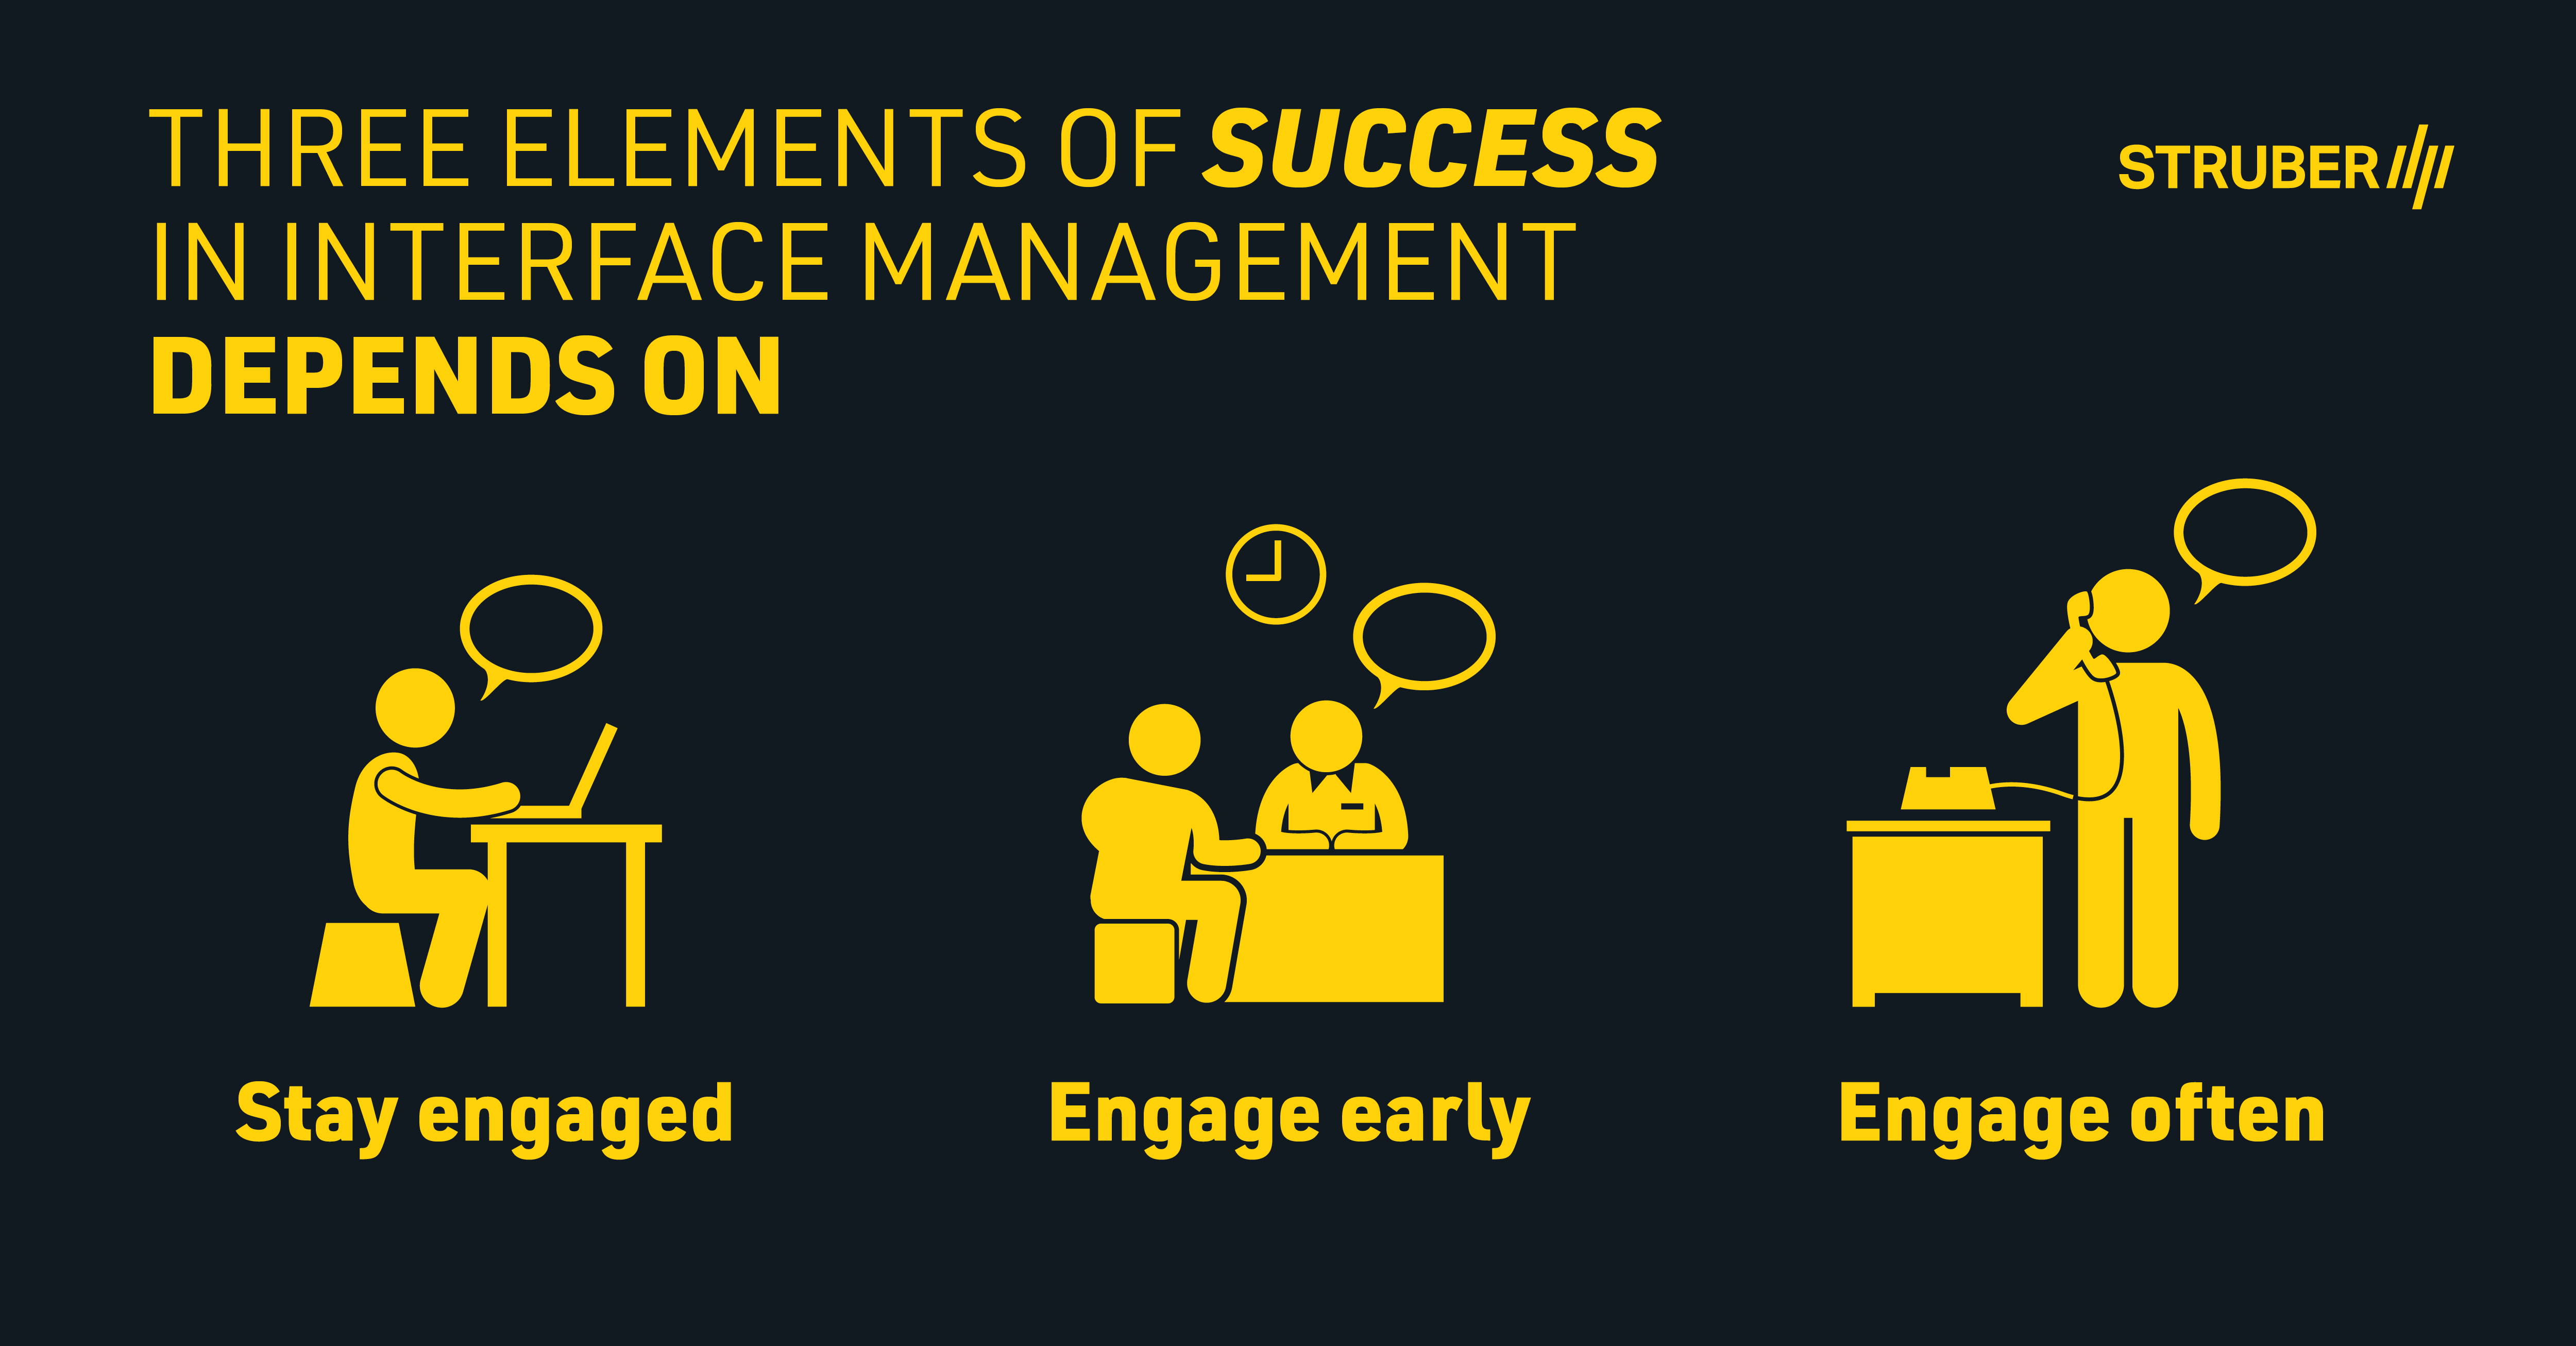 STRUBER The Three Elements of Success in Interface Management